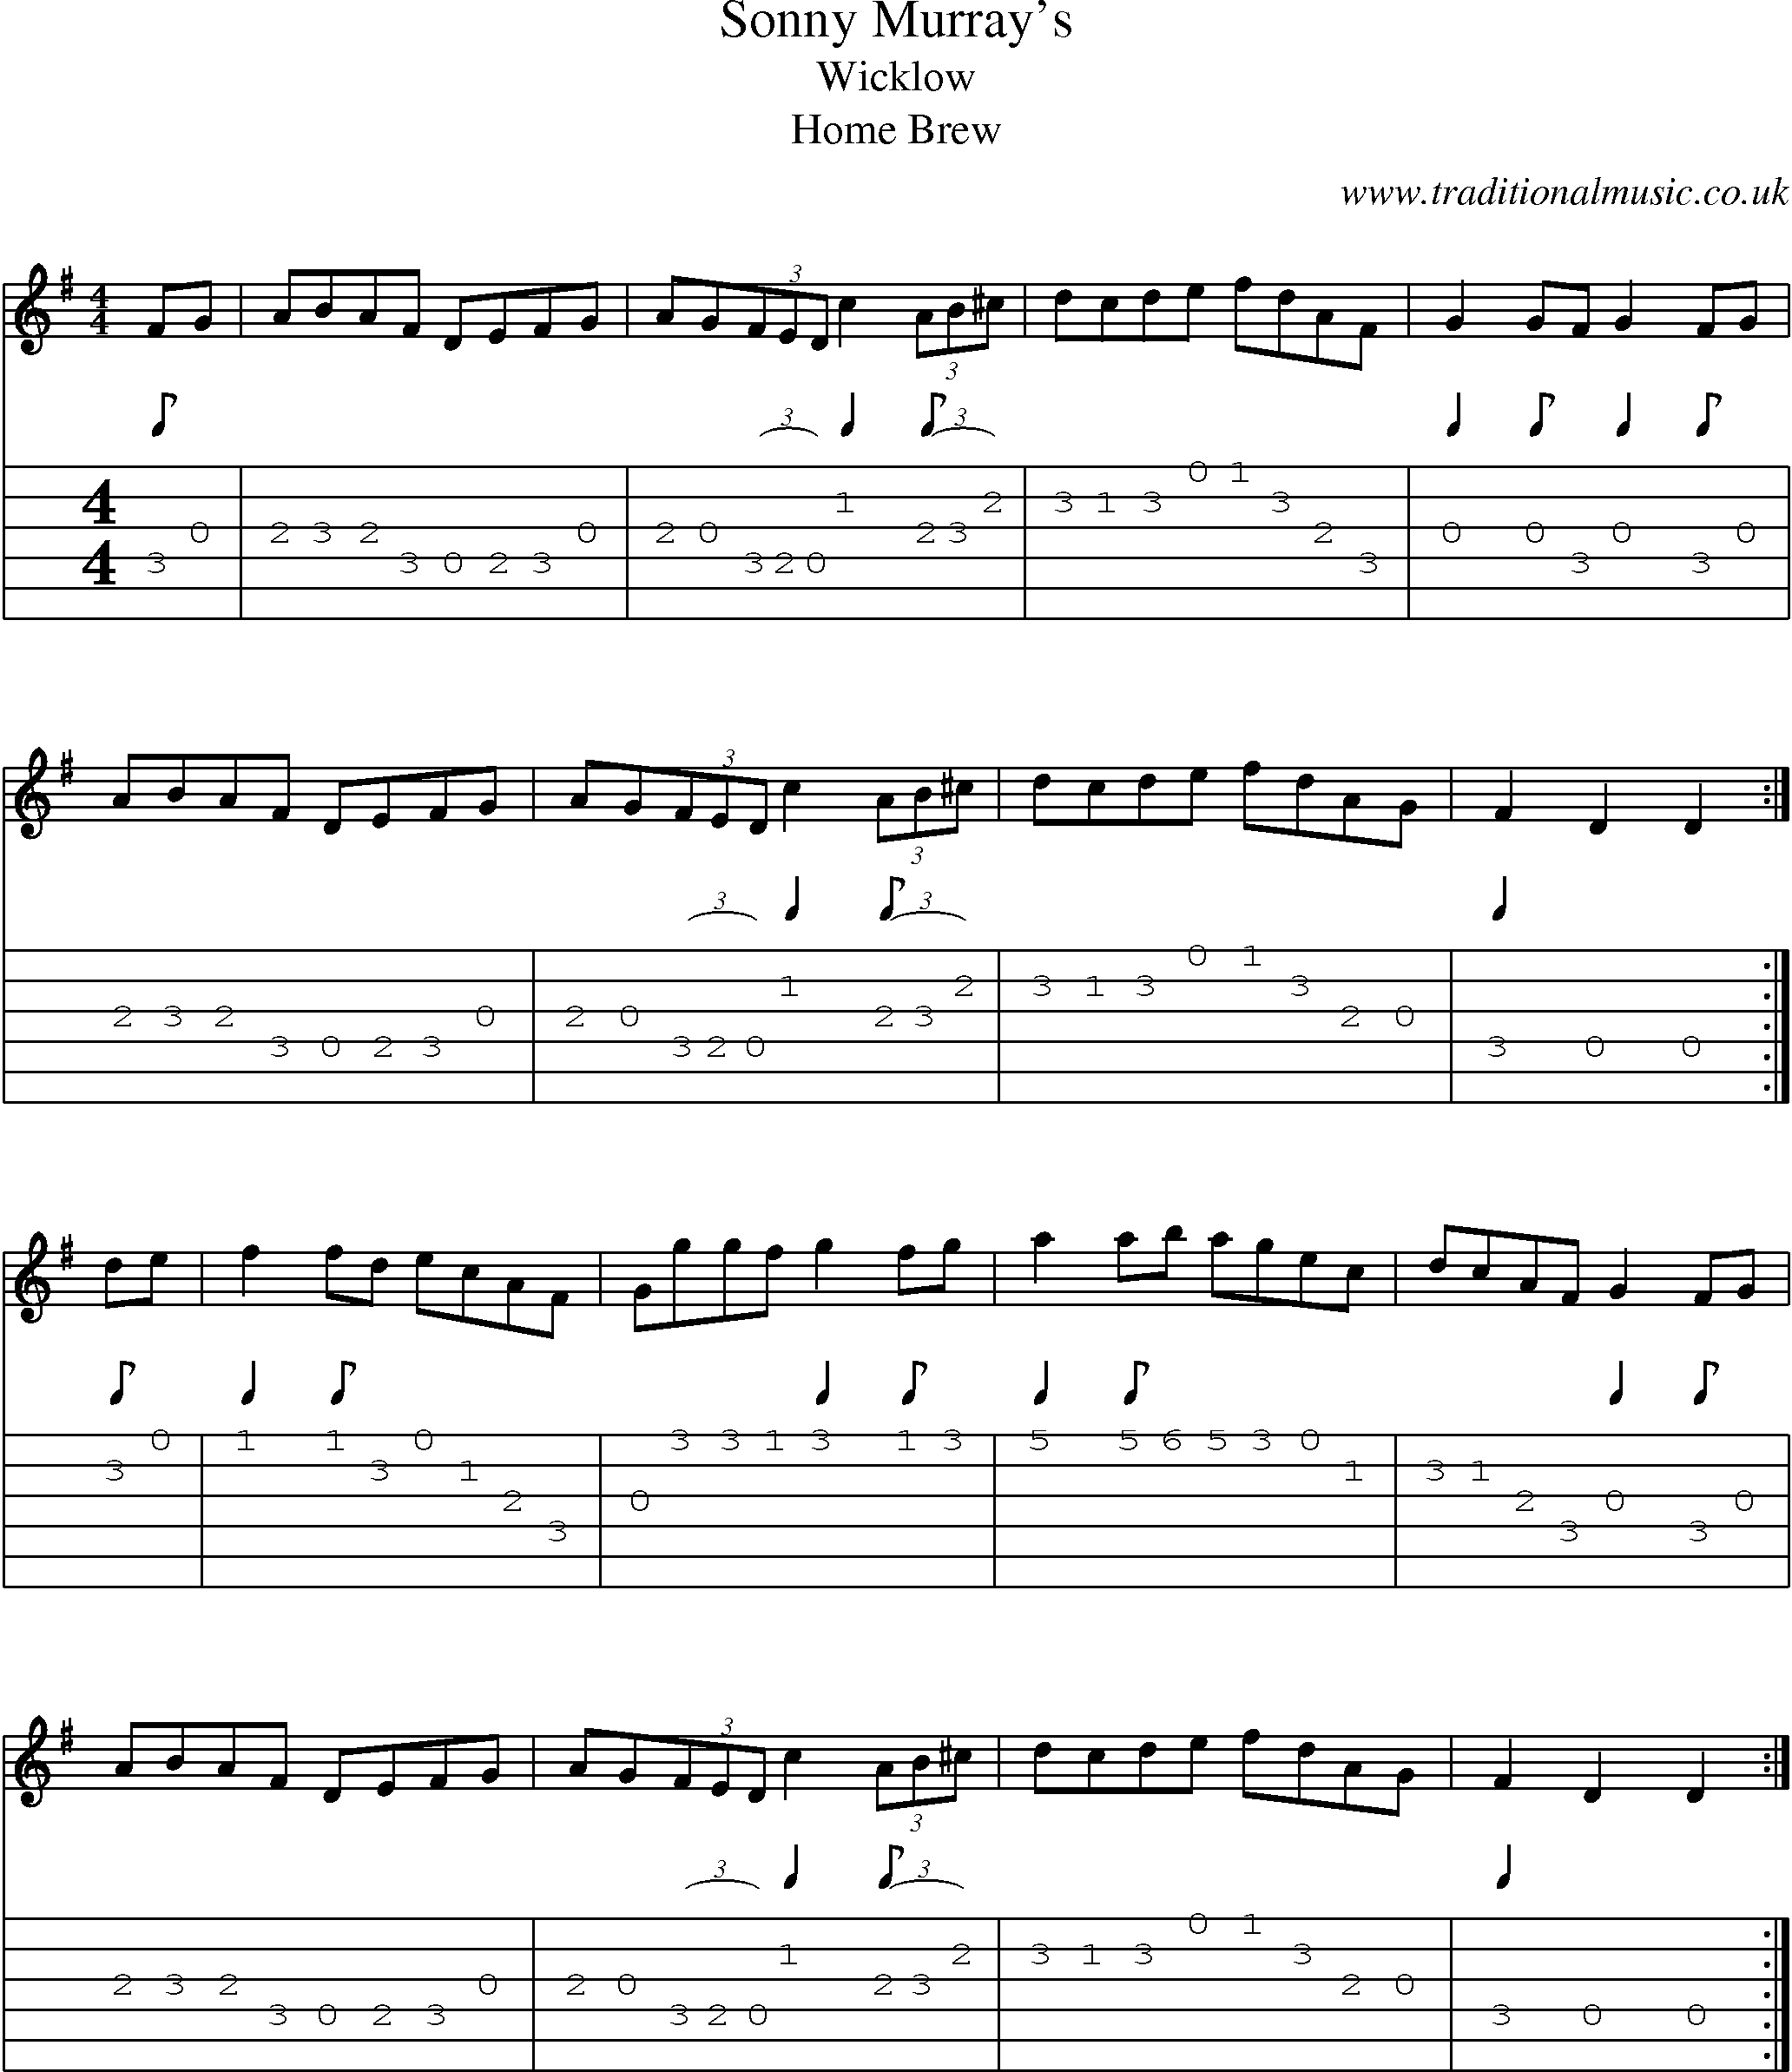 Music Score and Guitar Tabs for Sonny Murrays